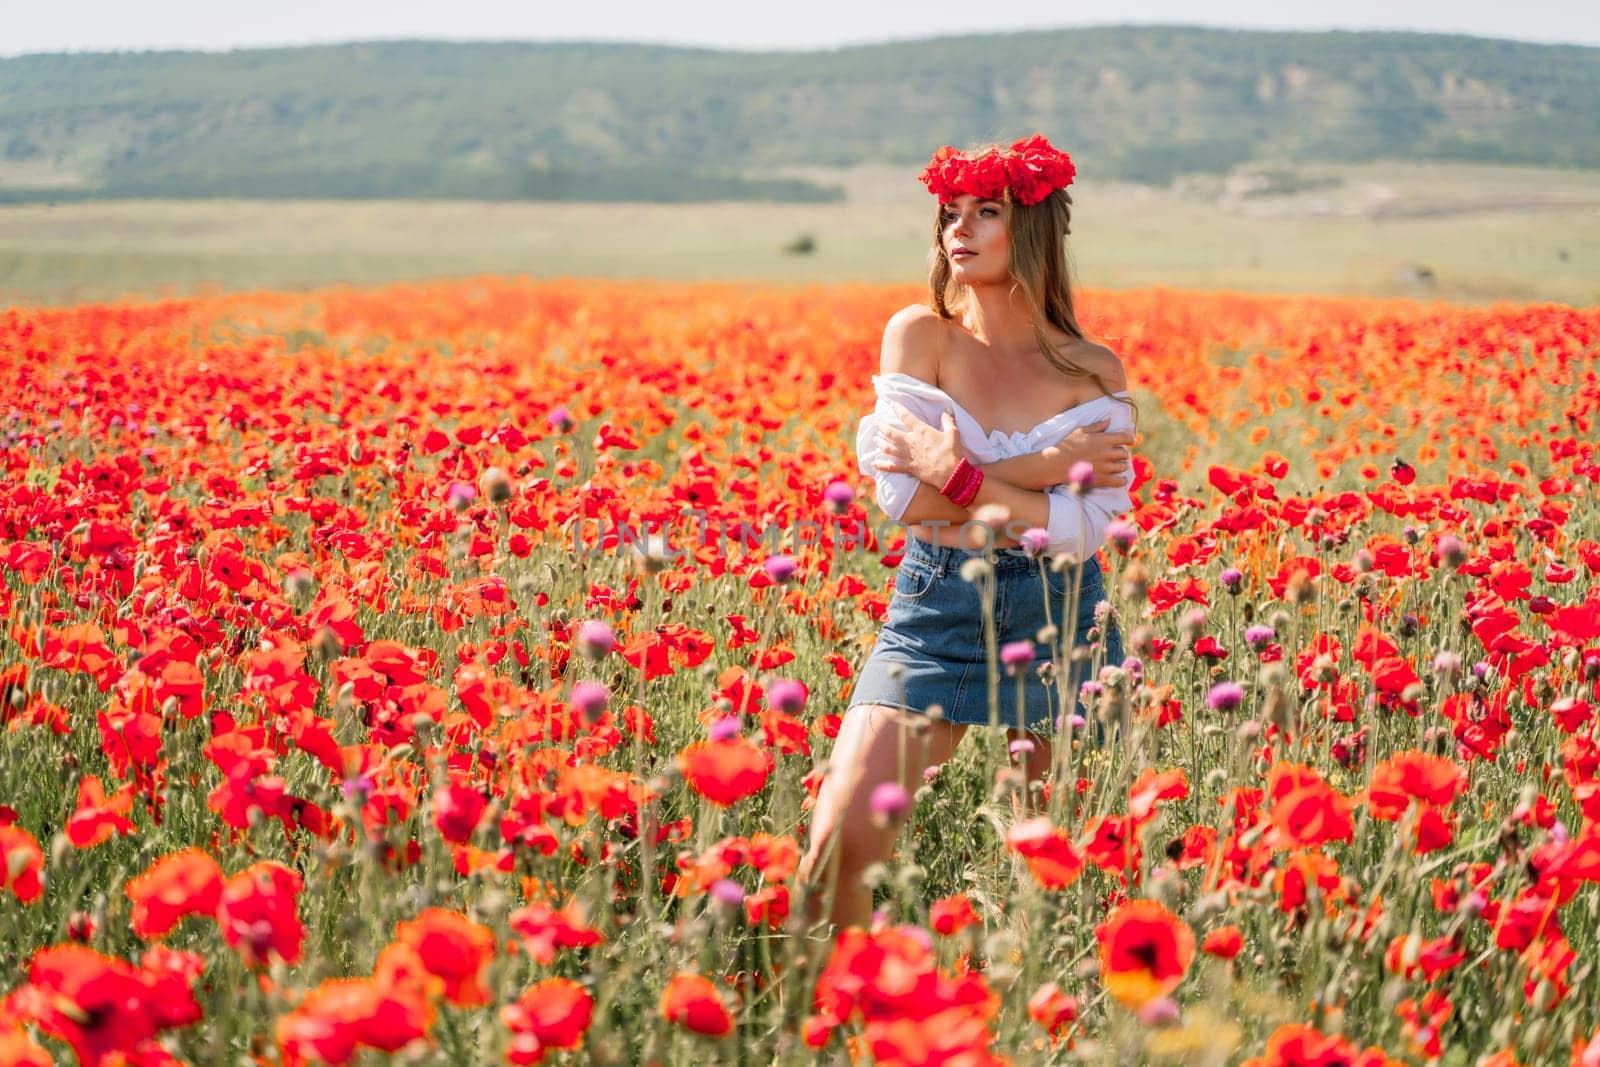 Happy woman in a poppy field in a white shirt and denim skirt with a wreath of poppies on her head posing and enjoying the poppy field. by Matiunina